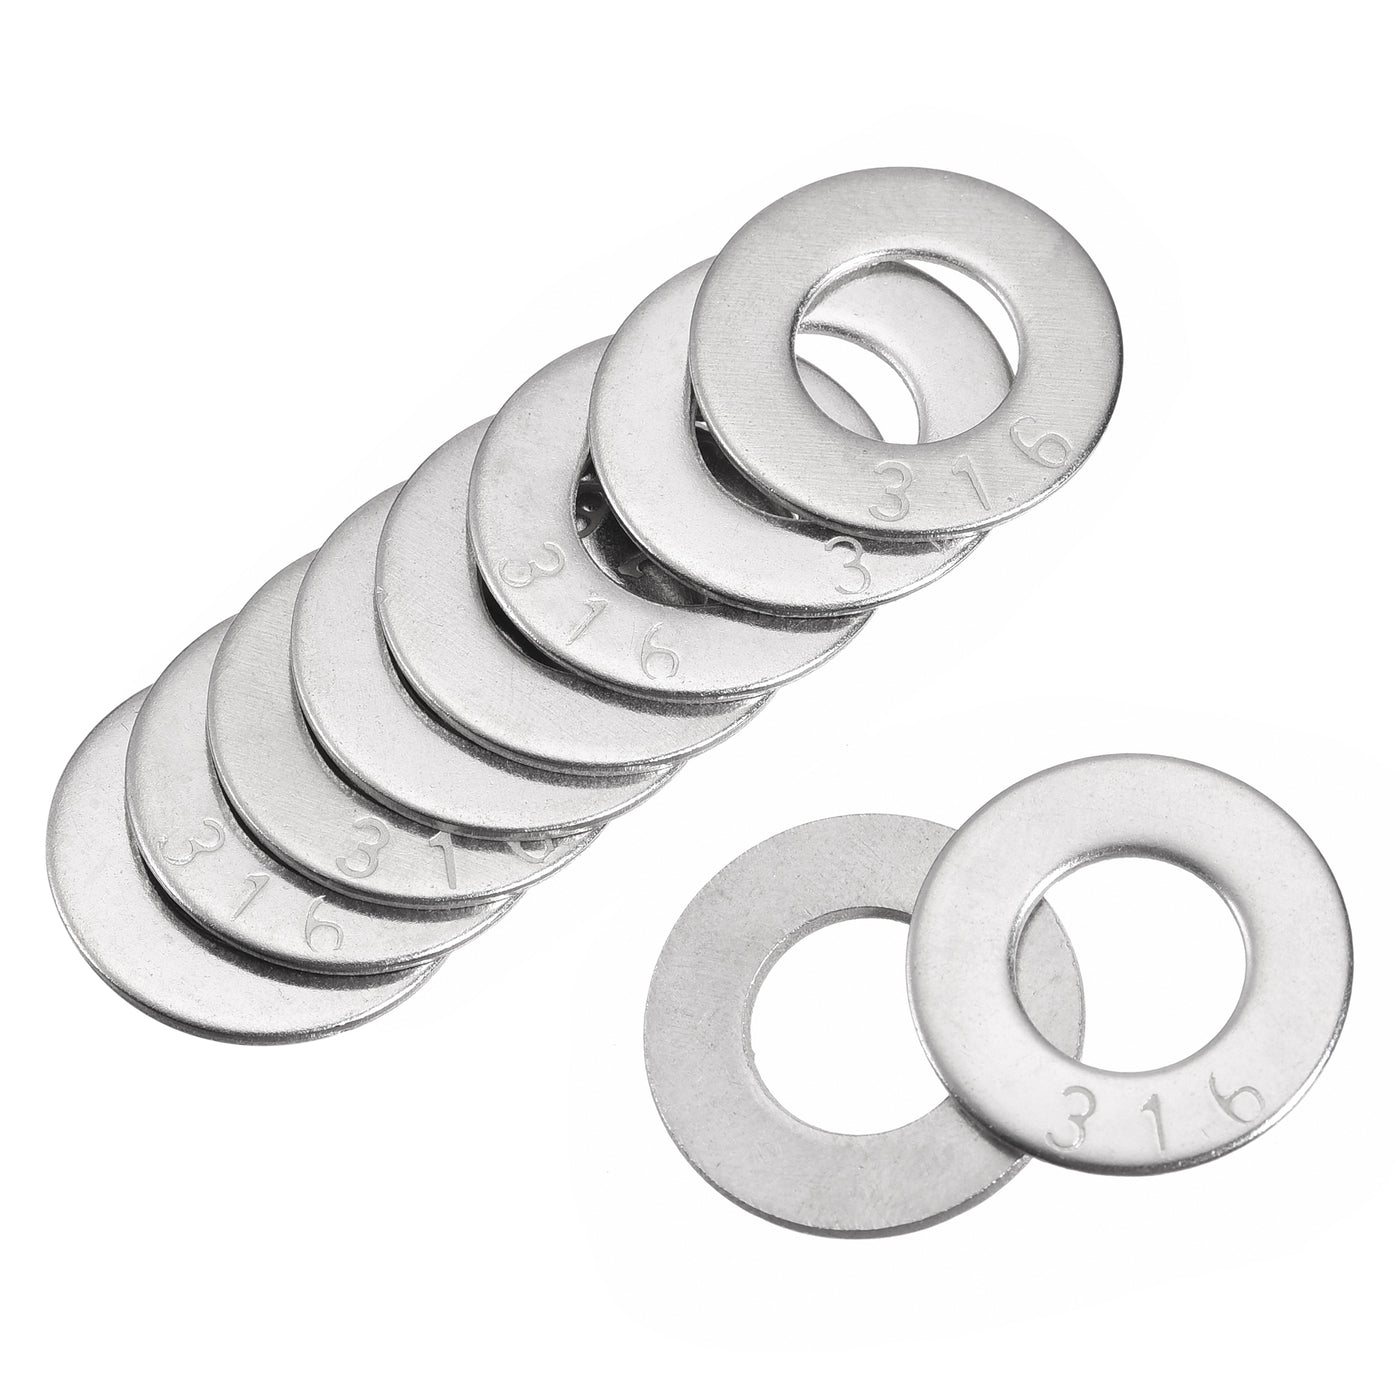 uxcell Uxcell 316 Stainless Steel Flat Washer for Screw Bolt for Furniture